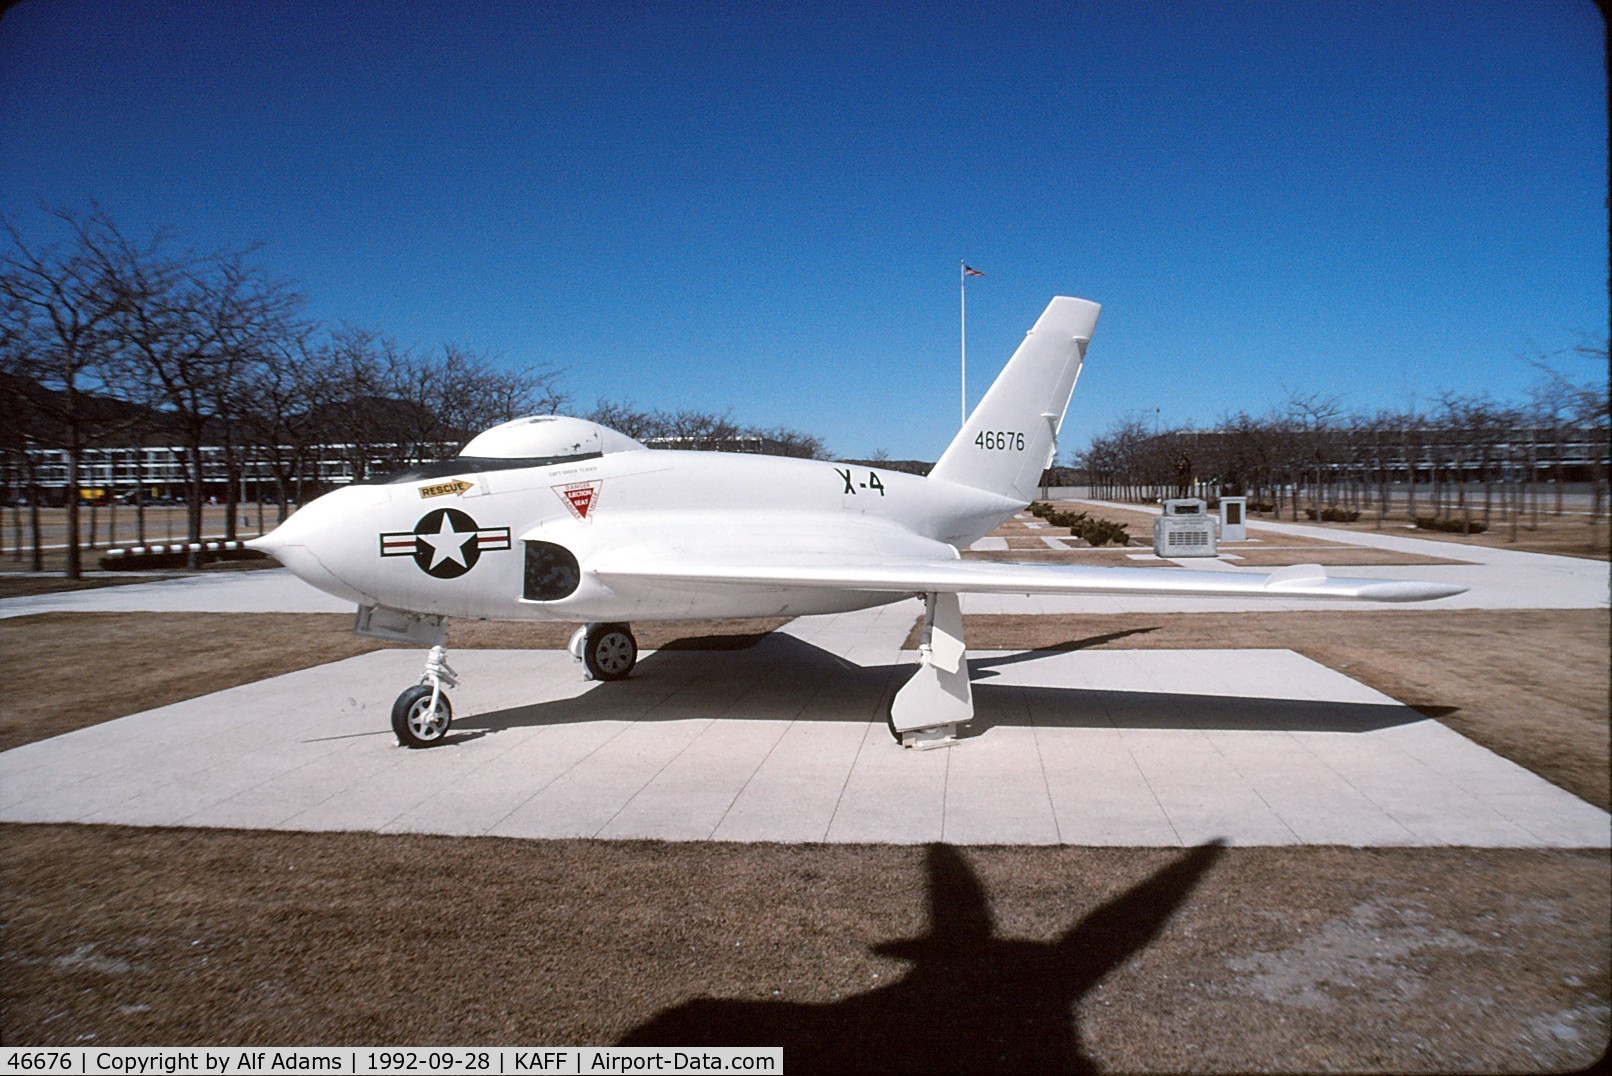 46676, 1946 Northrop X-4 Bantam C/N 46-676, Displayed at the USAF Academy, Colorado Springs, Colorado in 1992. It is now at the Air Force Flight Test Museum, Edwards Air Force Base, California.